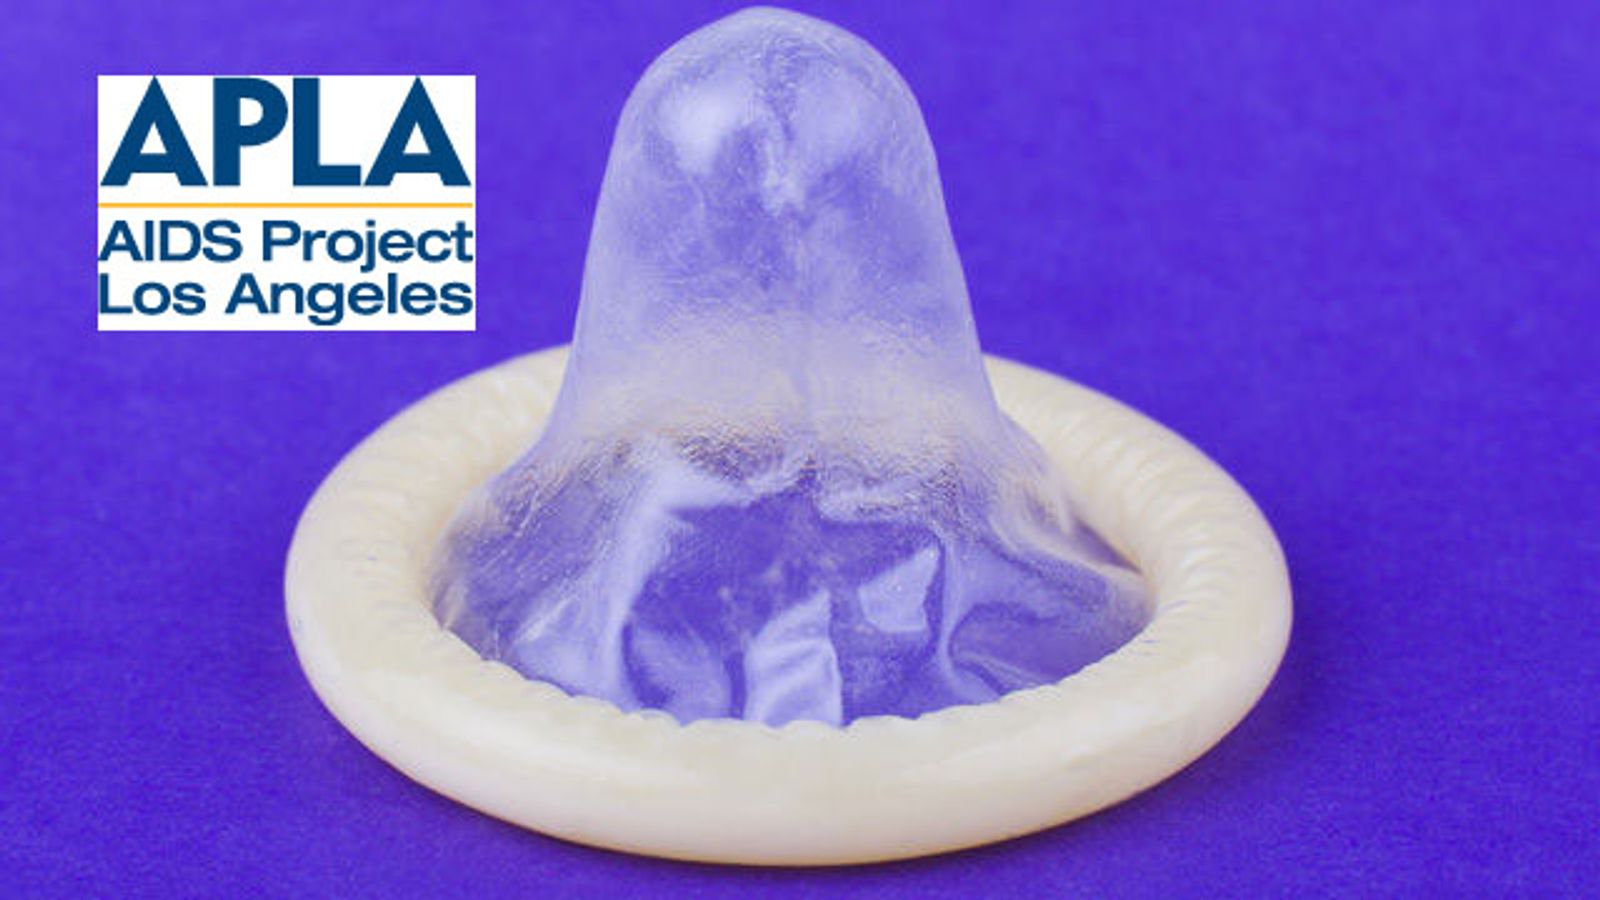 APLA Issues Formal Statement Opposing Condom Measure